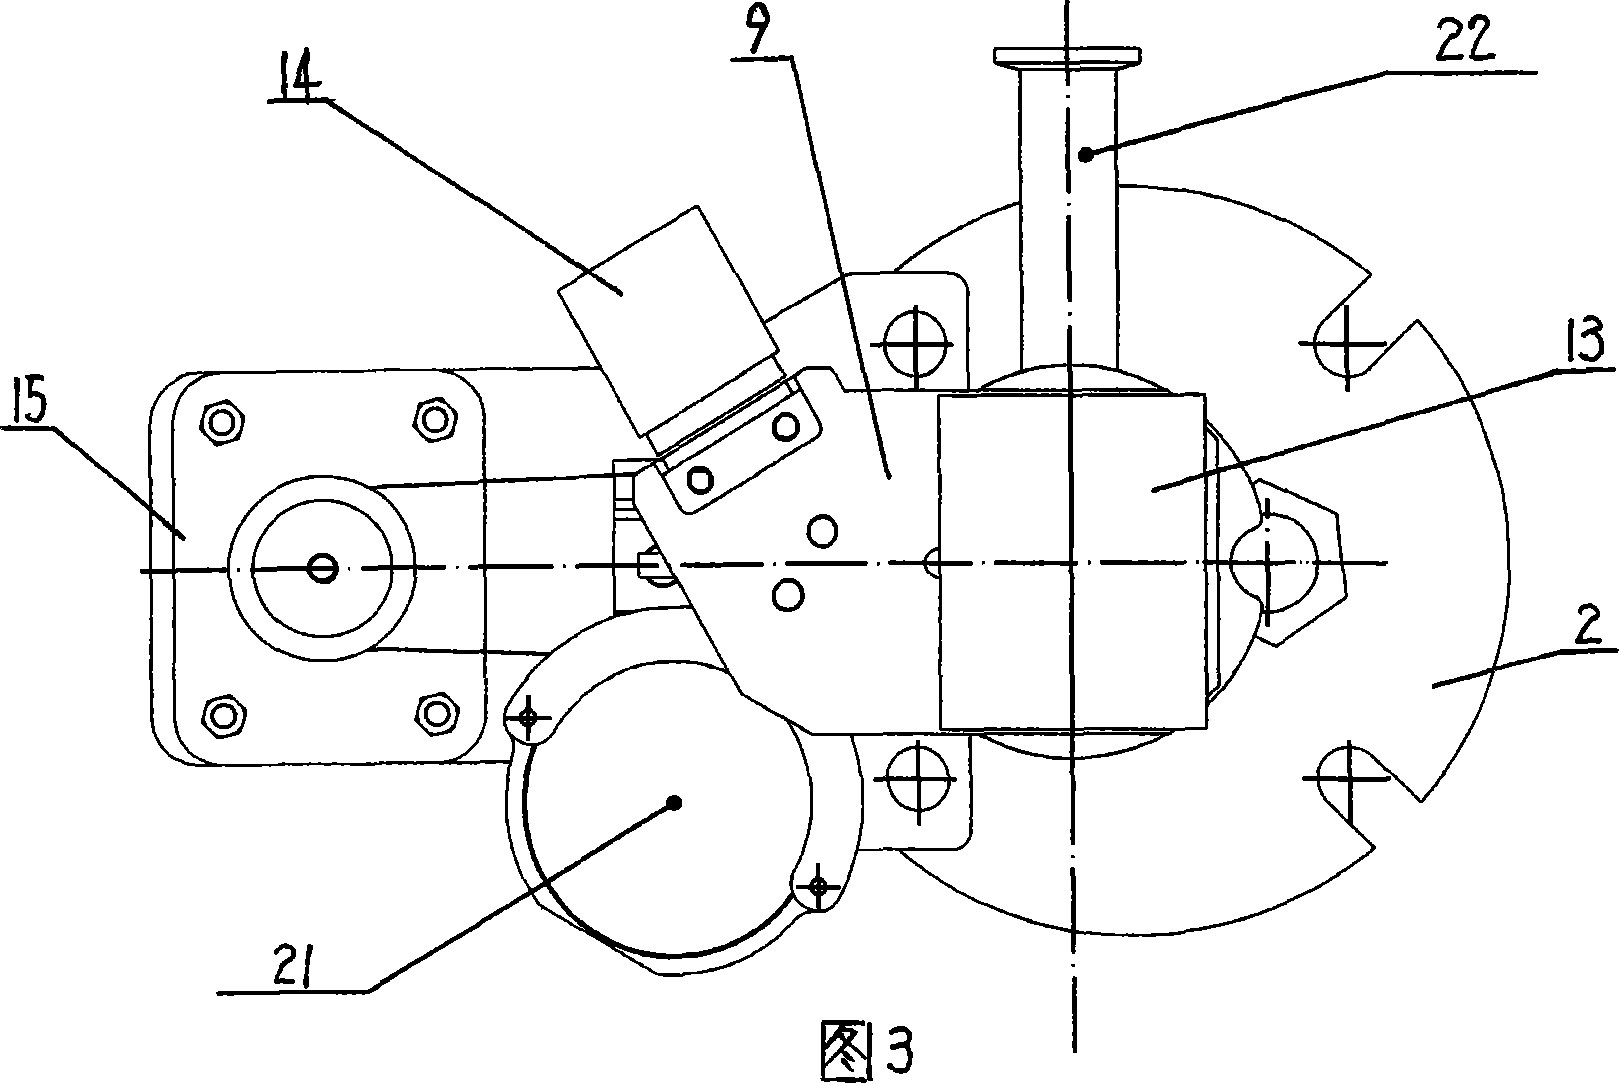 Viewing device for polysilicon furnace